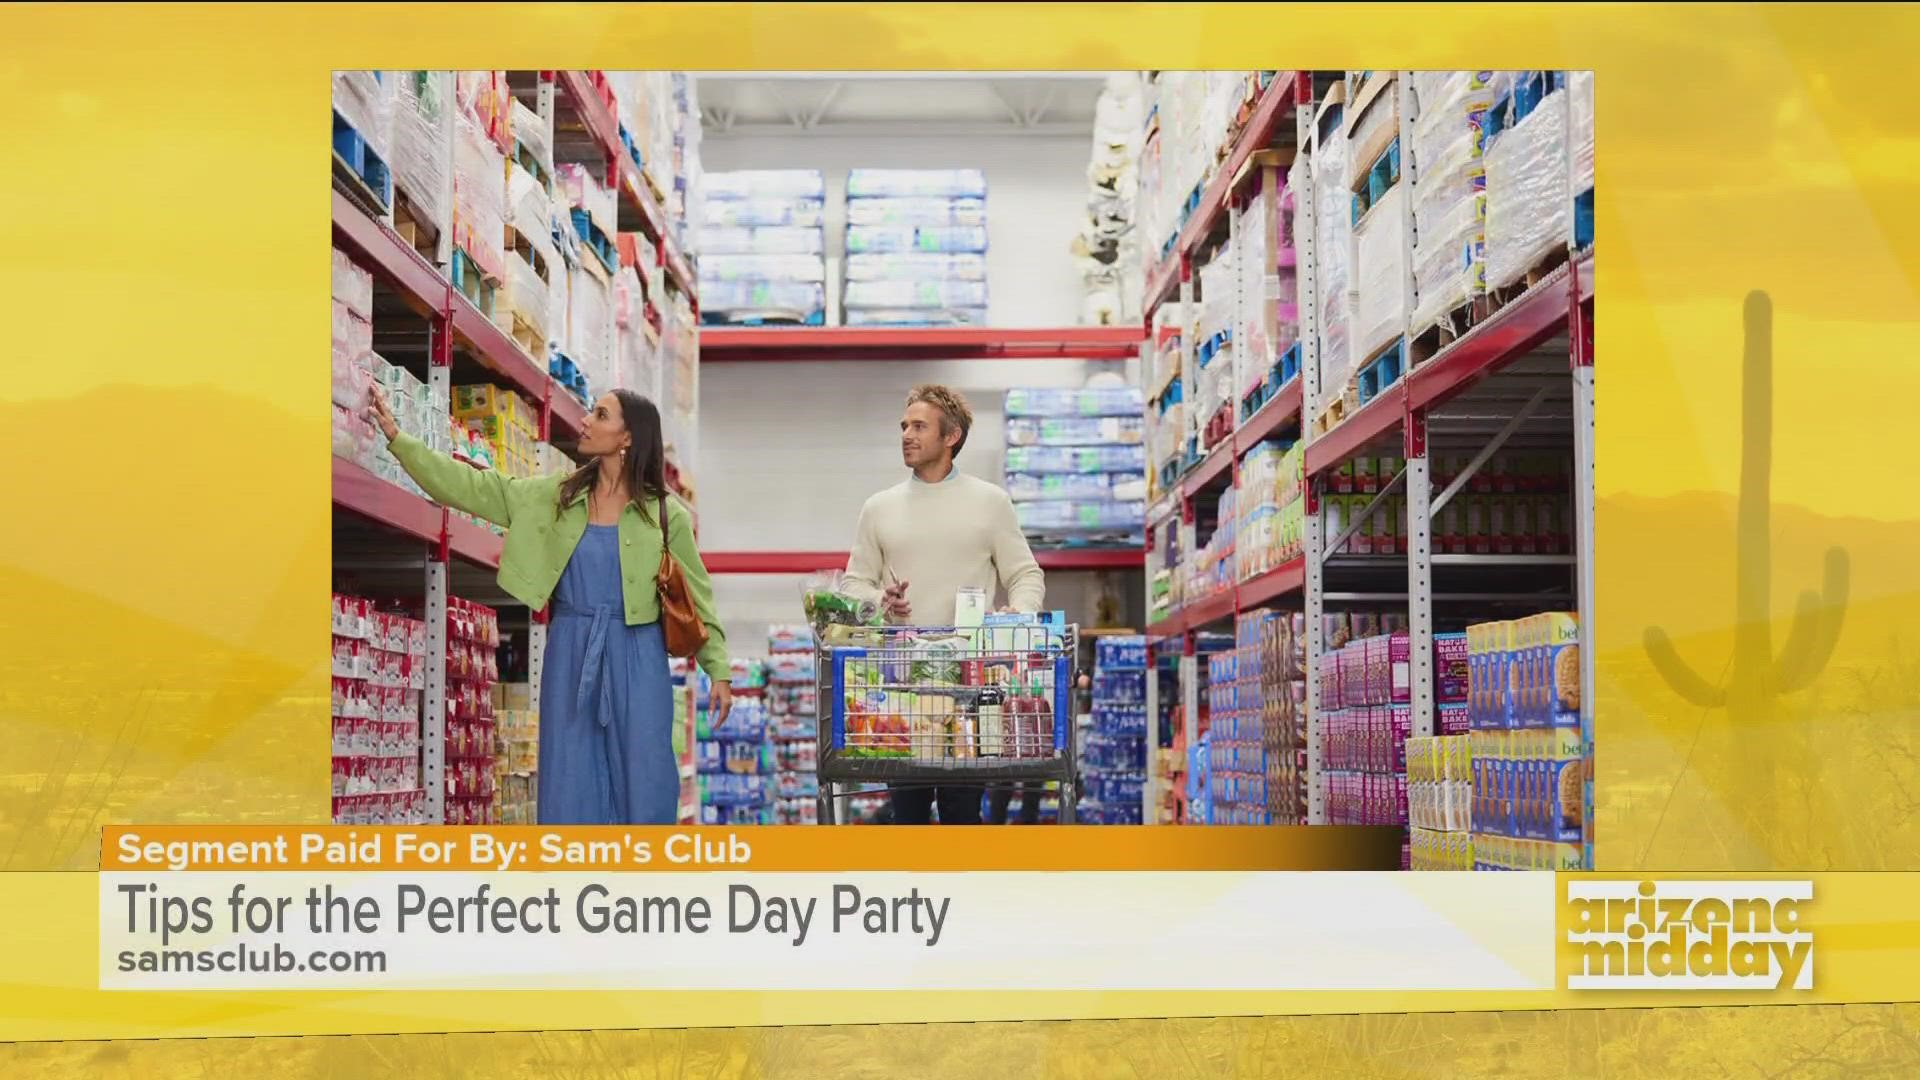 Sam's Club makes it easy to host for the big game! 